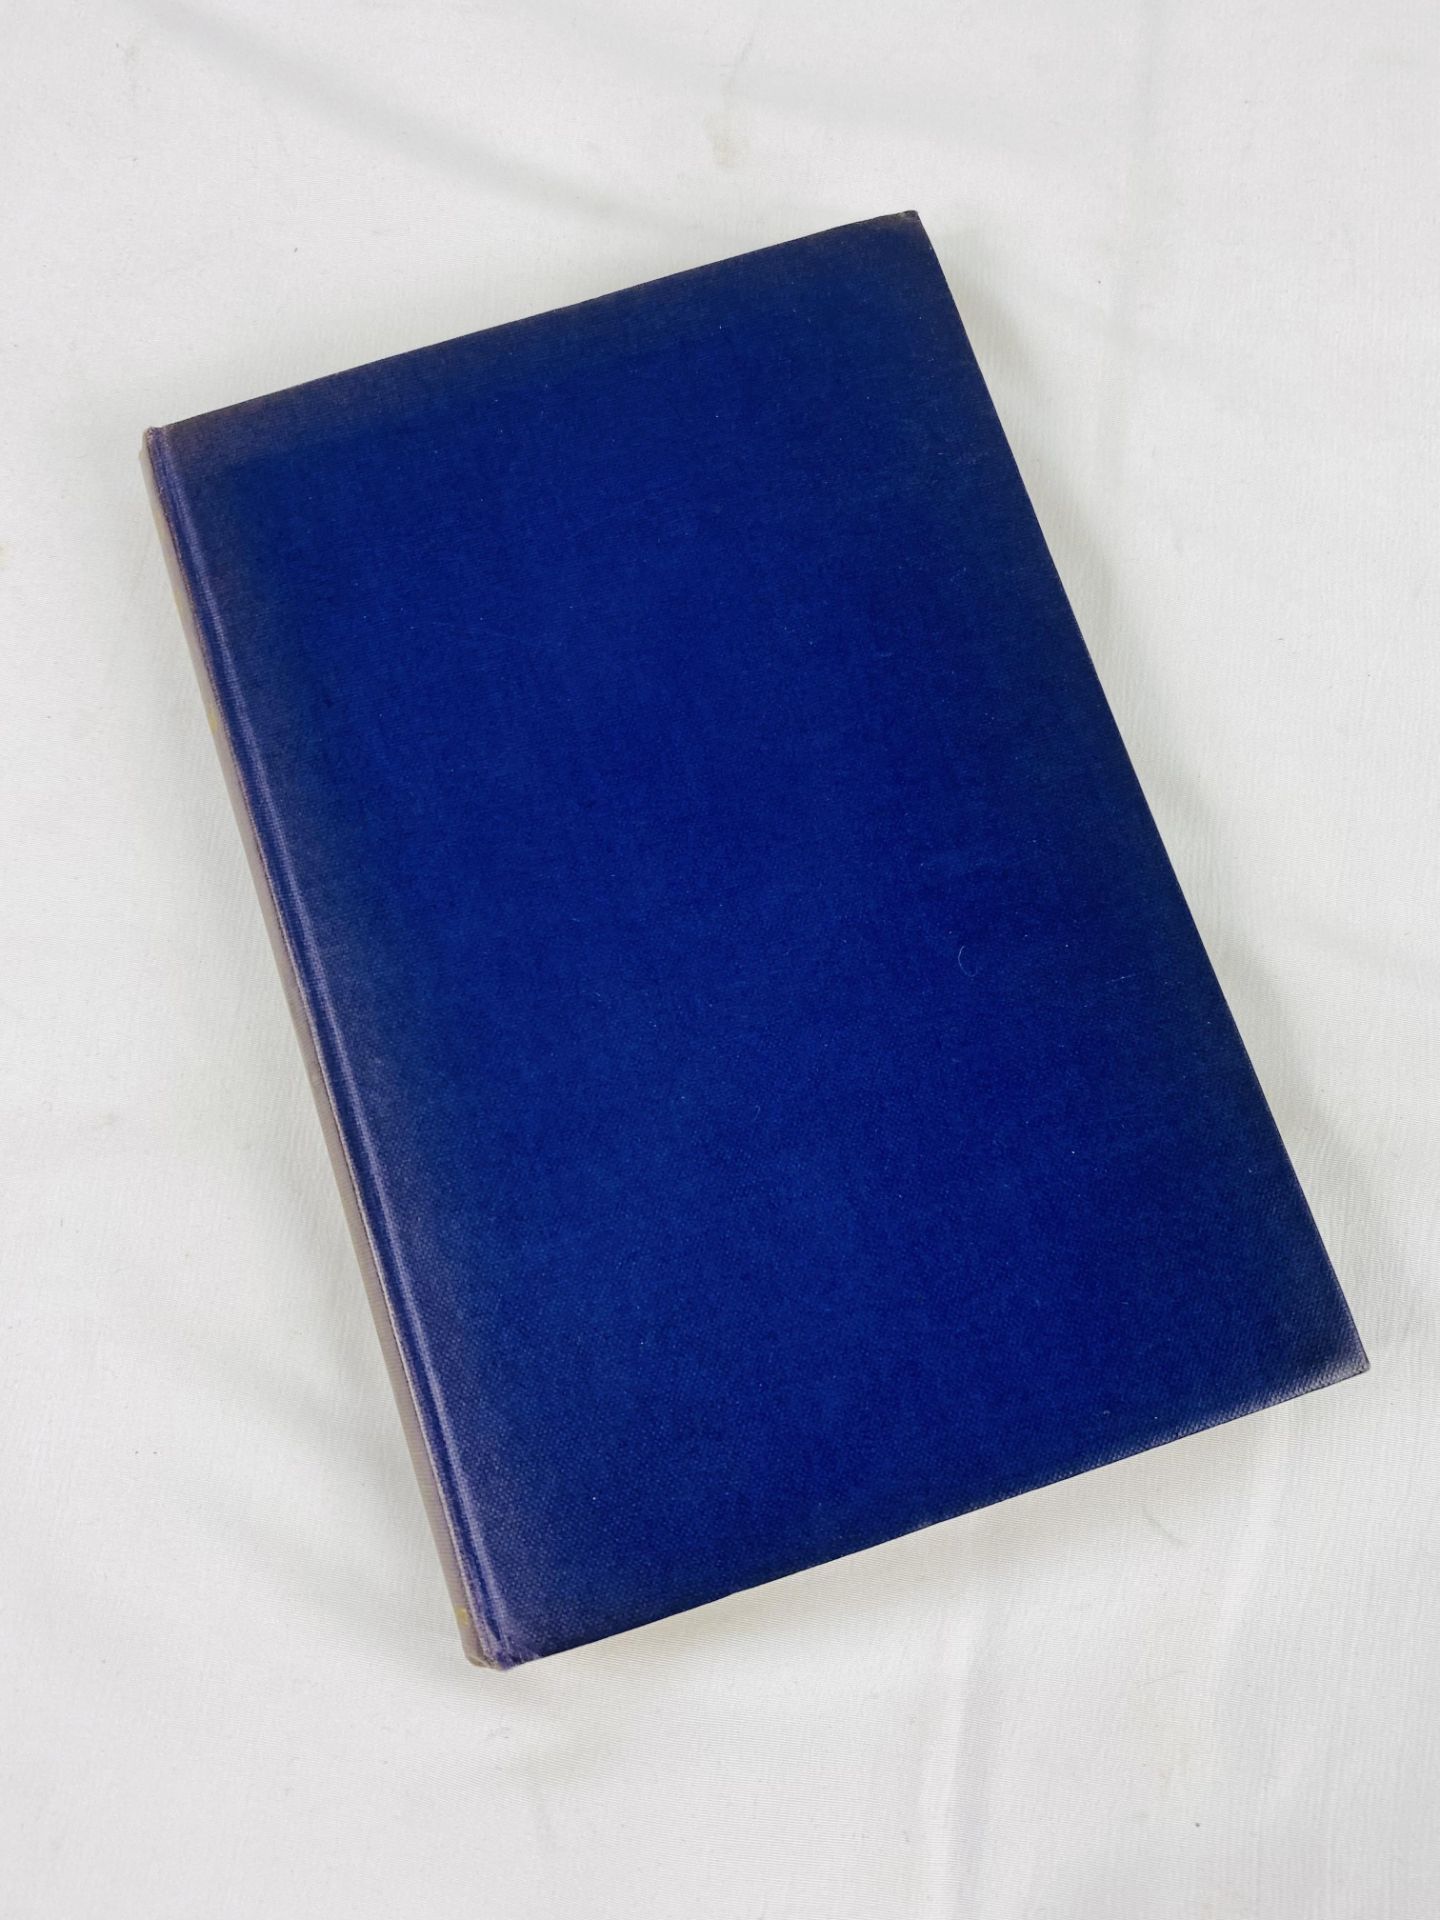 Noel Coward, Middle East Diary, first edition, William Heinemann Ltd, 1944 - Image 2 of 7